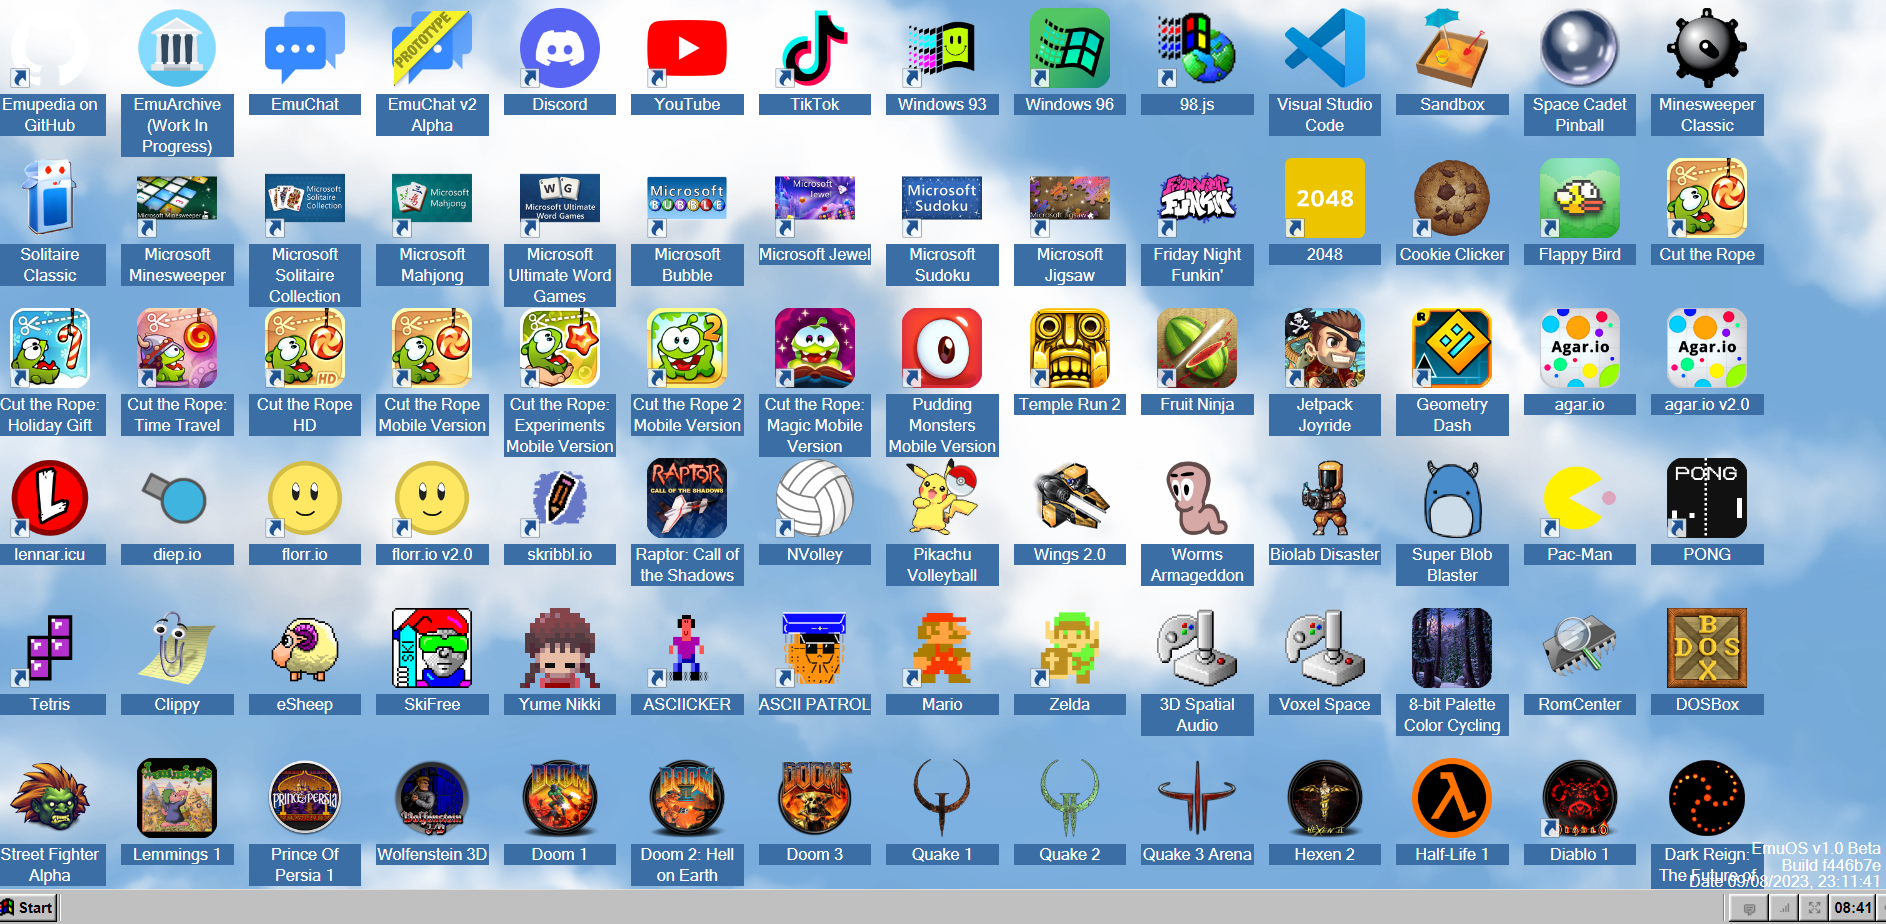 EmuOS: Play free classic games in your browser